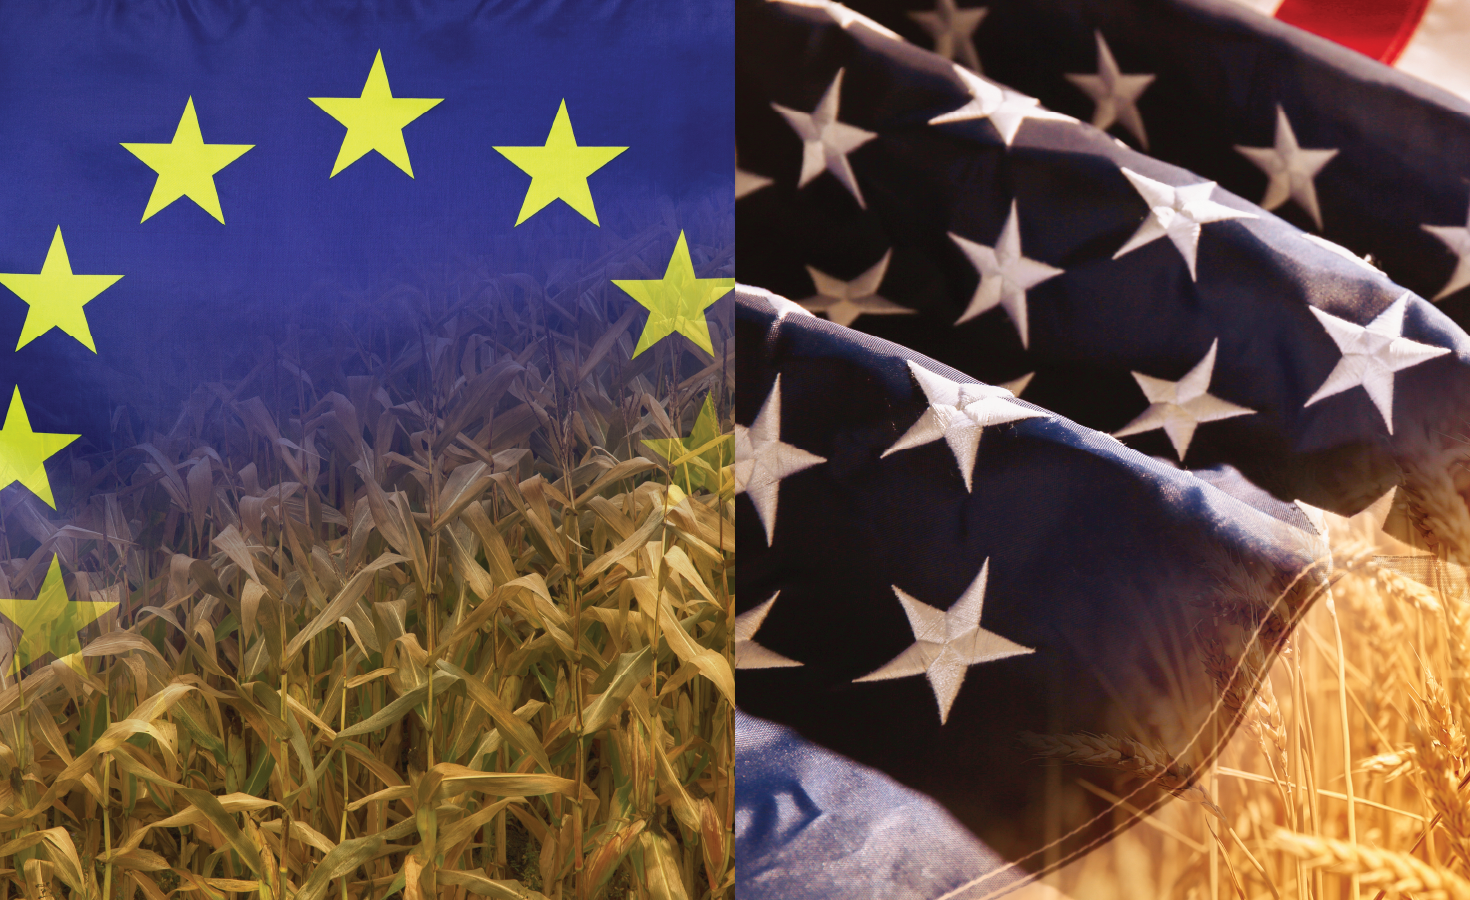 EU and US flags on wheat